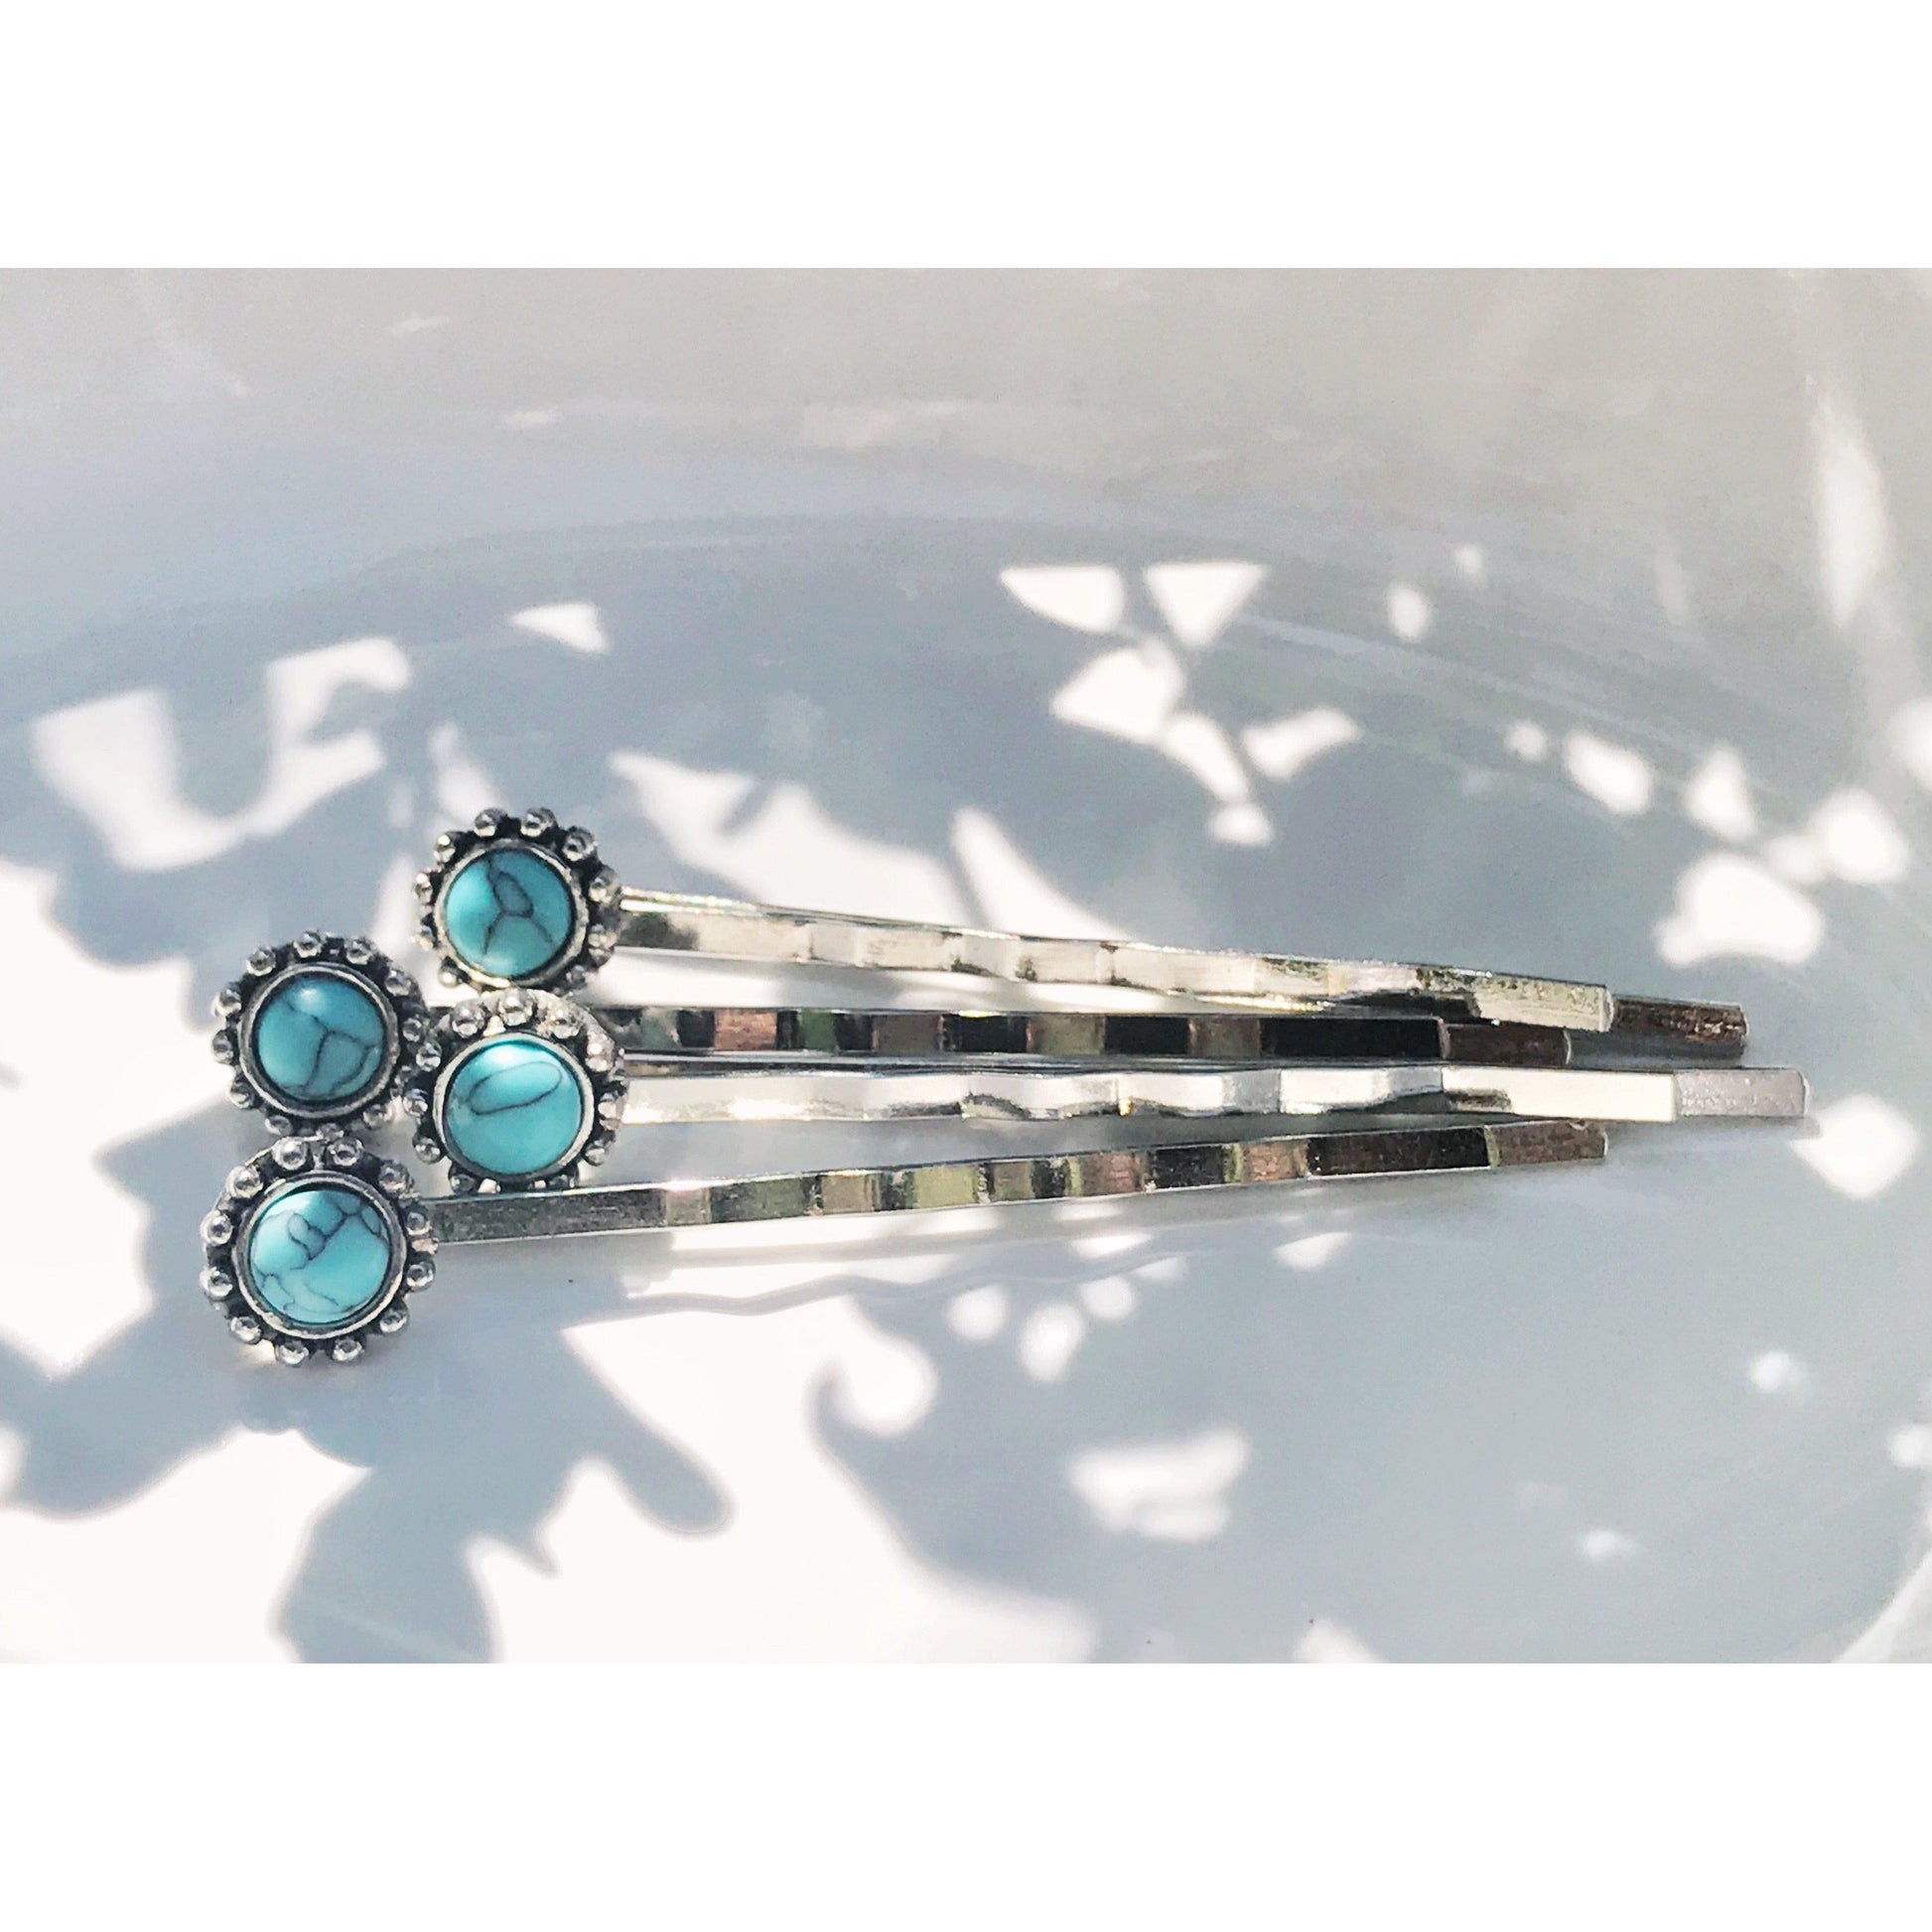 Women's Western Turquoise Hair Pins - Stylish Accessories for Western-inspired Looks